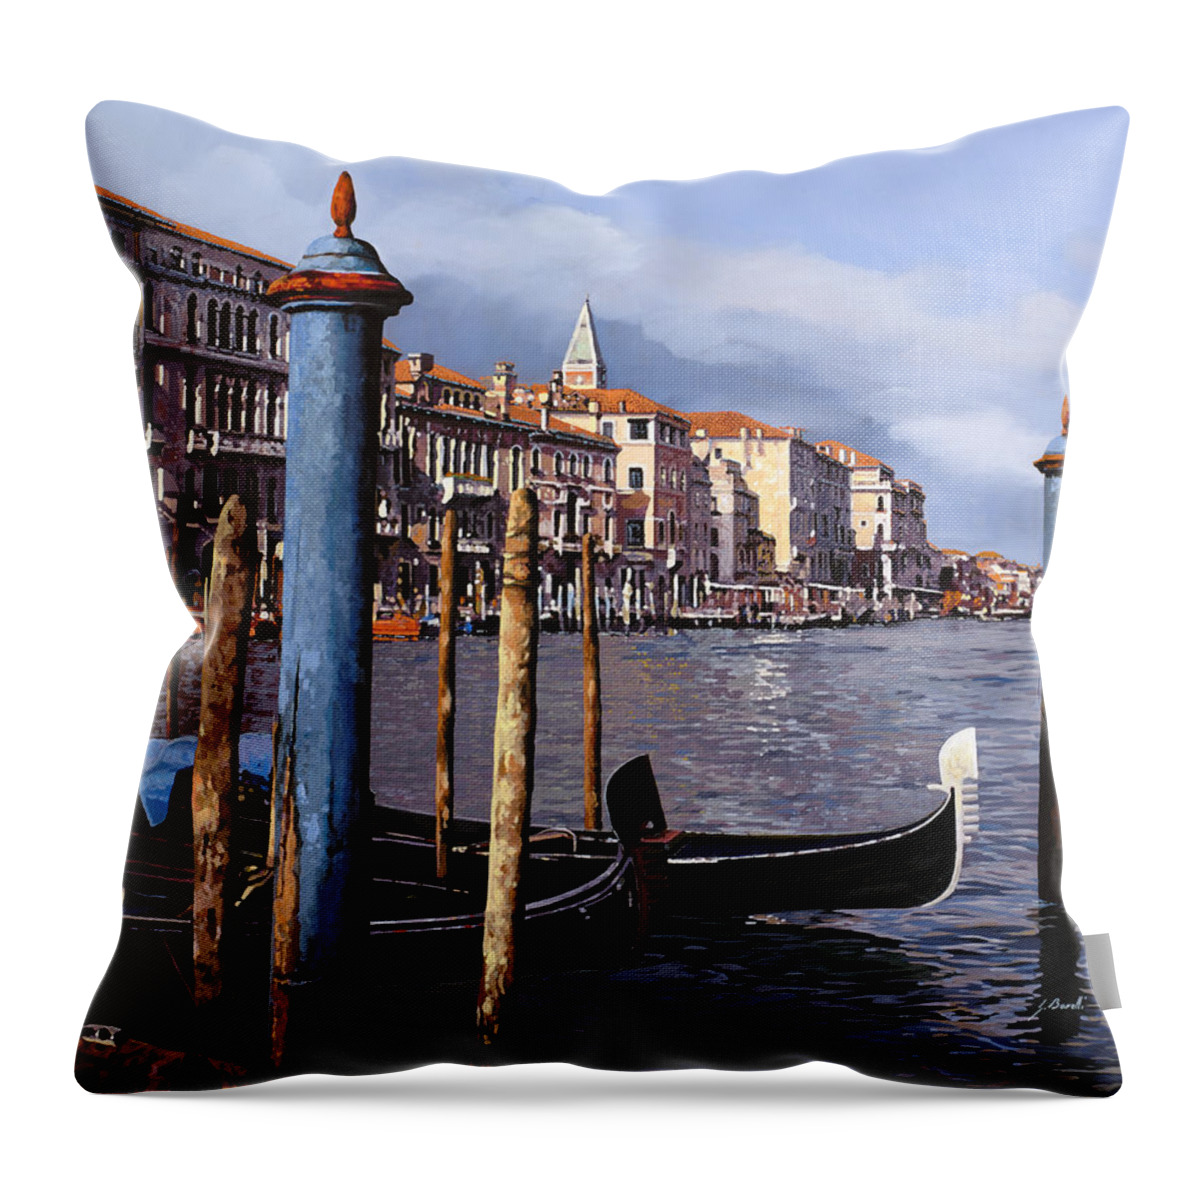 Venice Throw Pillow featuring the painting I Pali Blu Sul Canal Grande by Guido Borelli